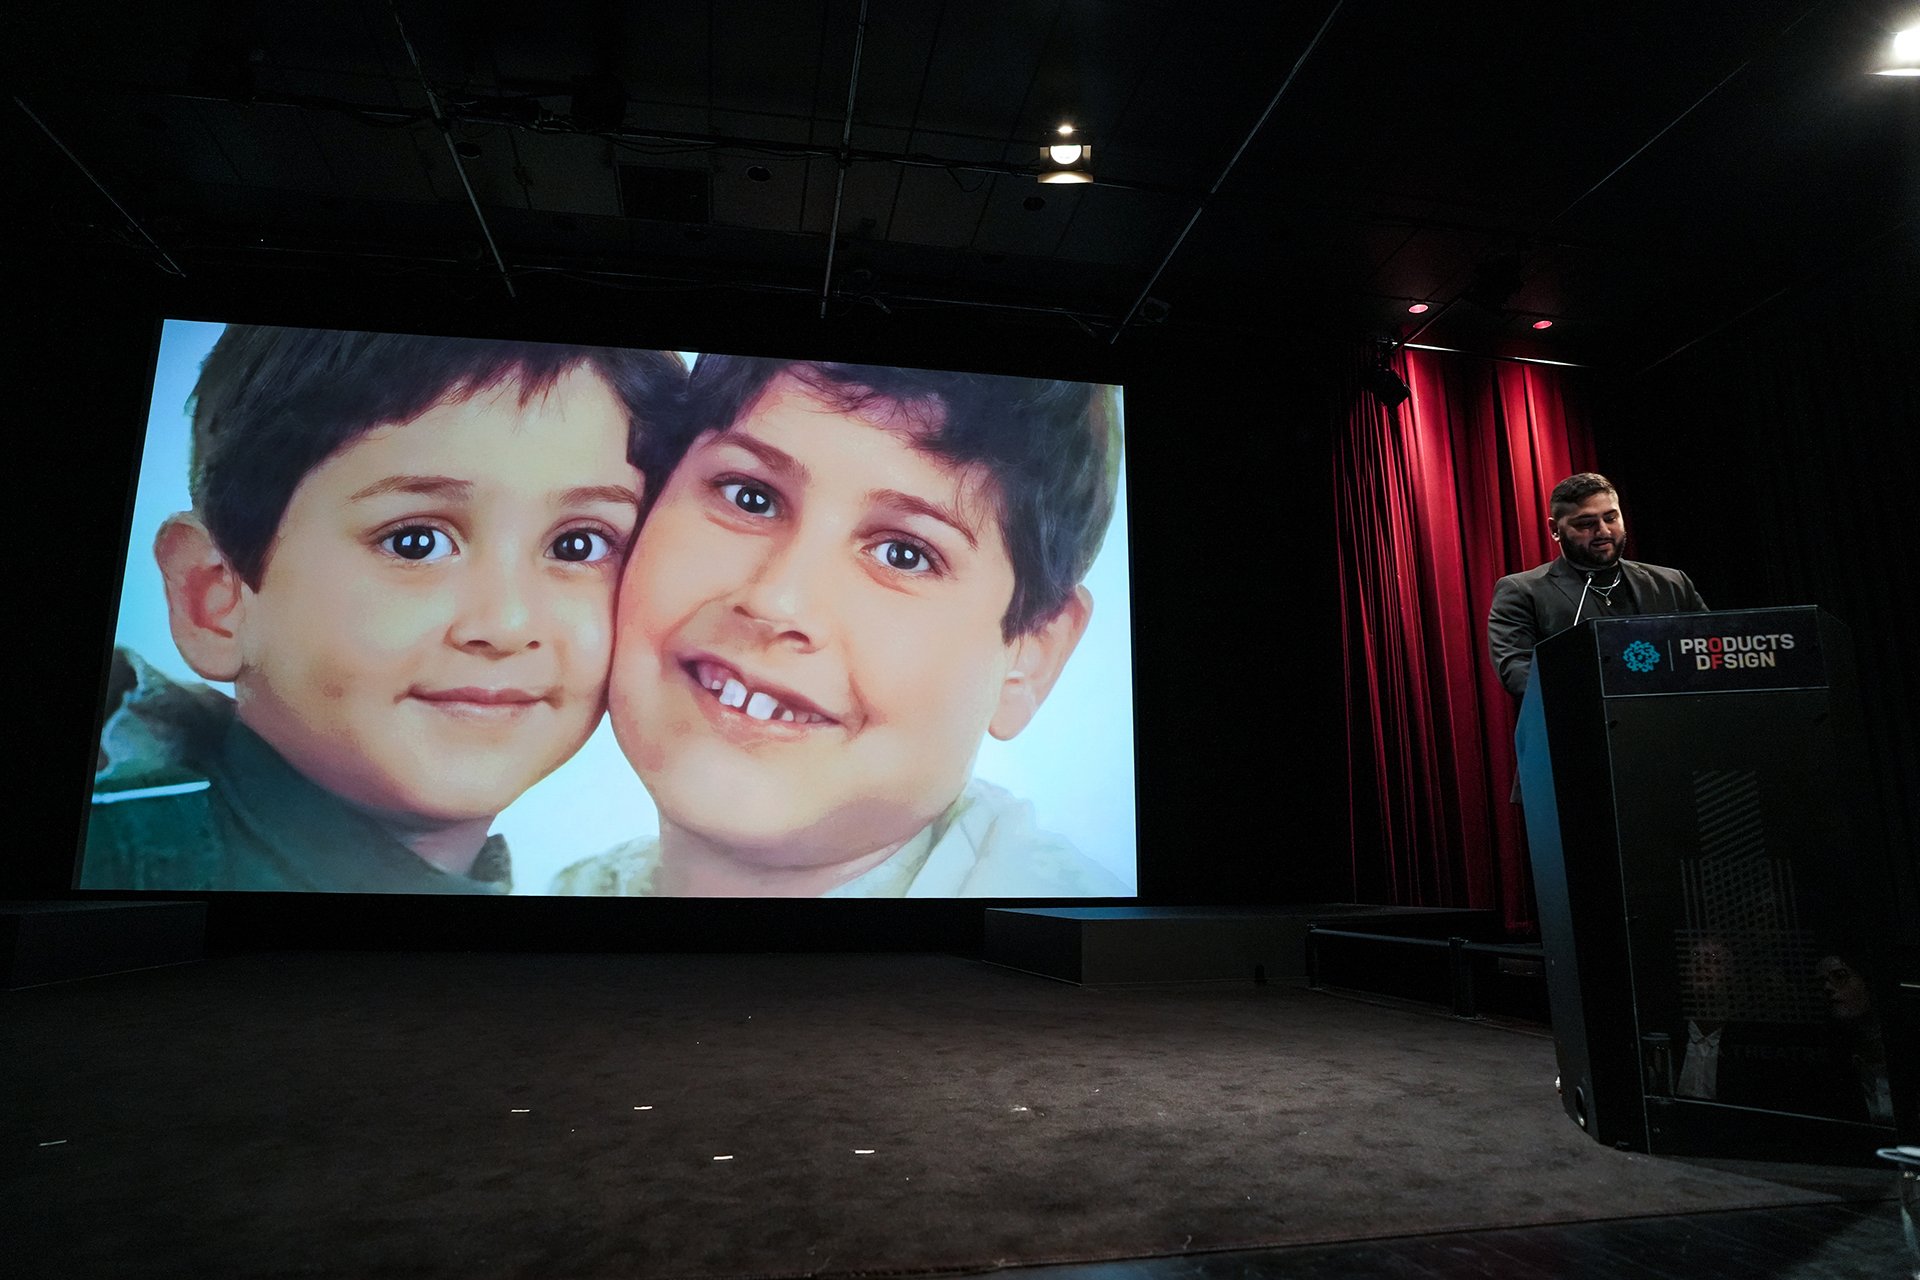  Speaker at the podium with image projected on screen of the faces of two children 